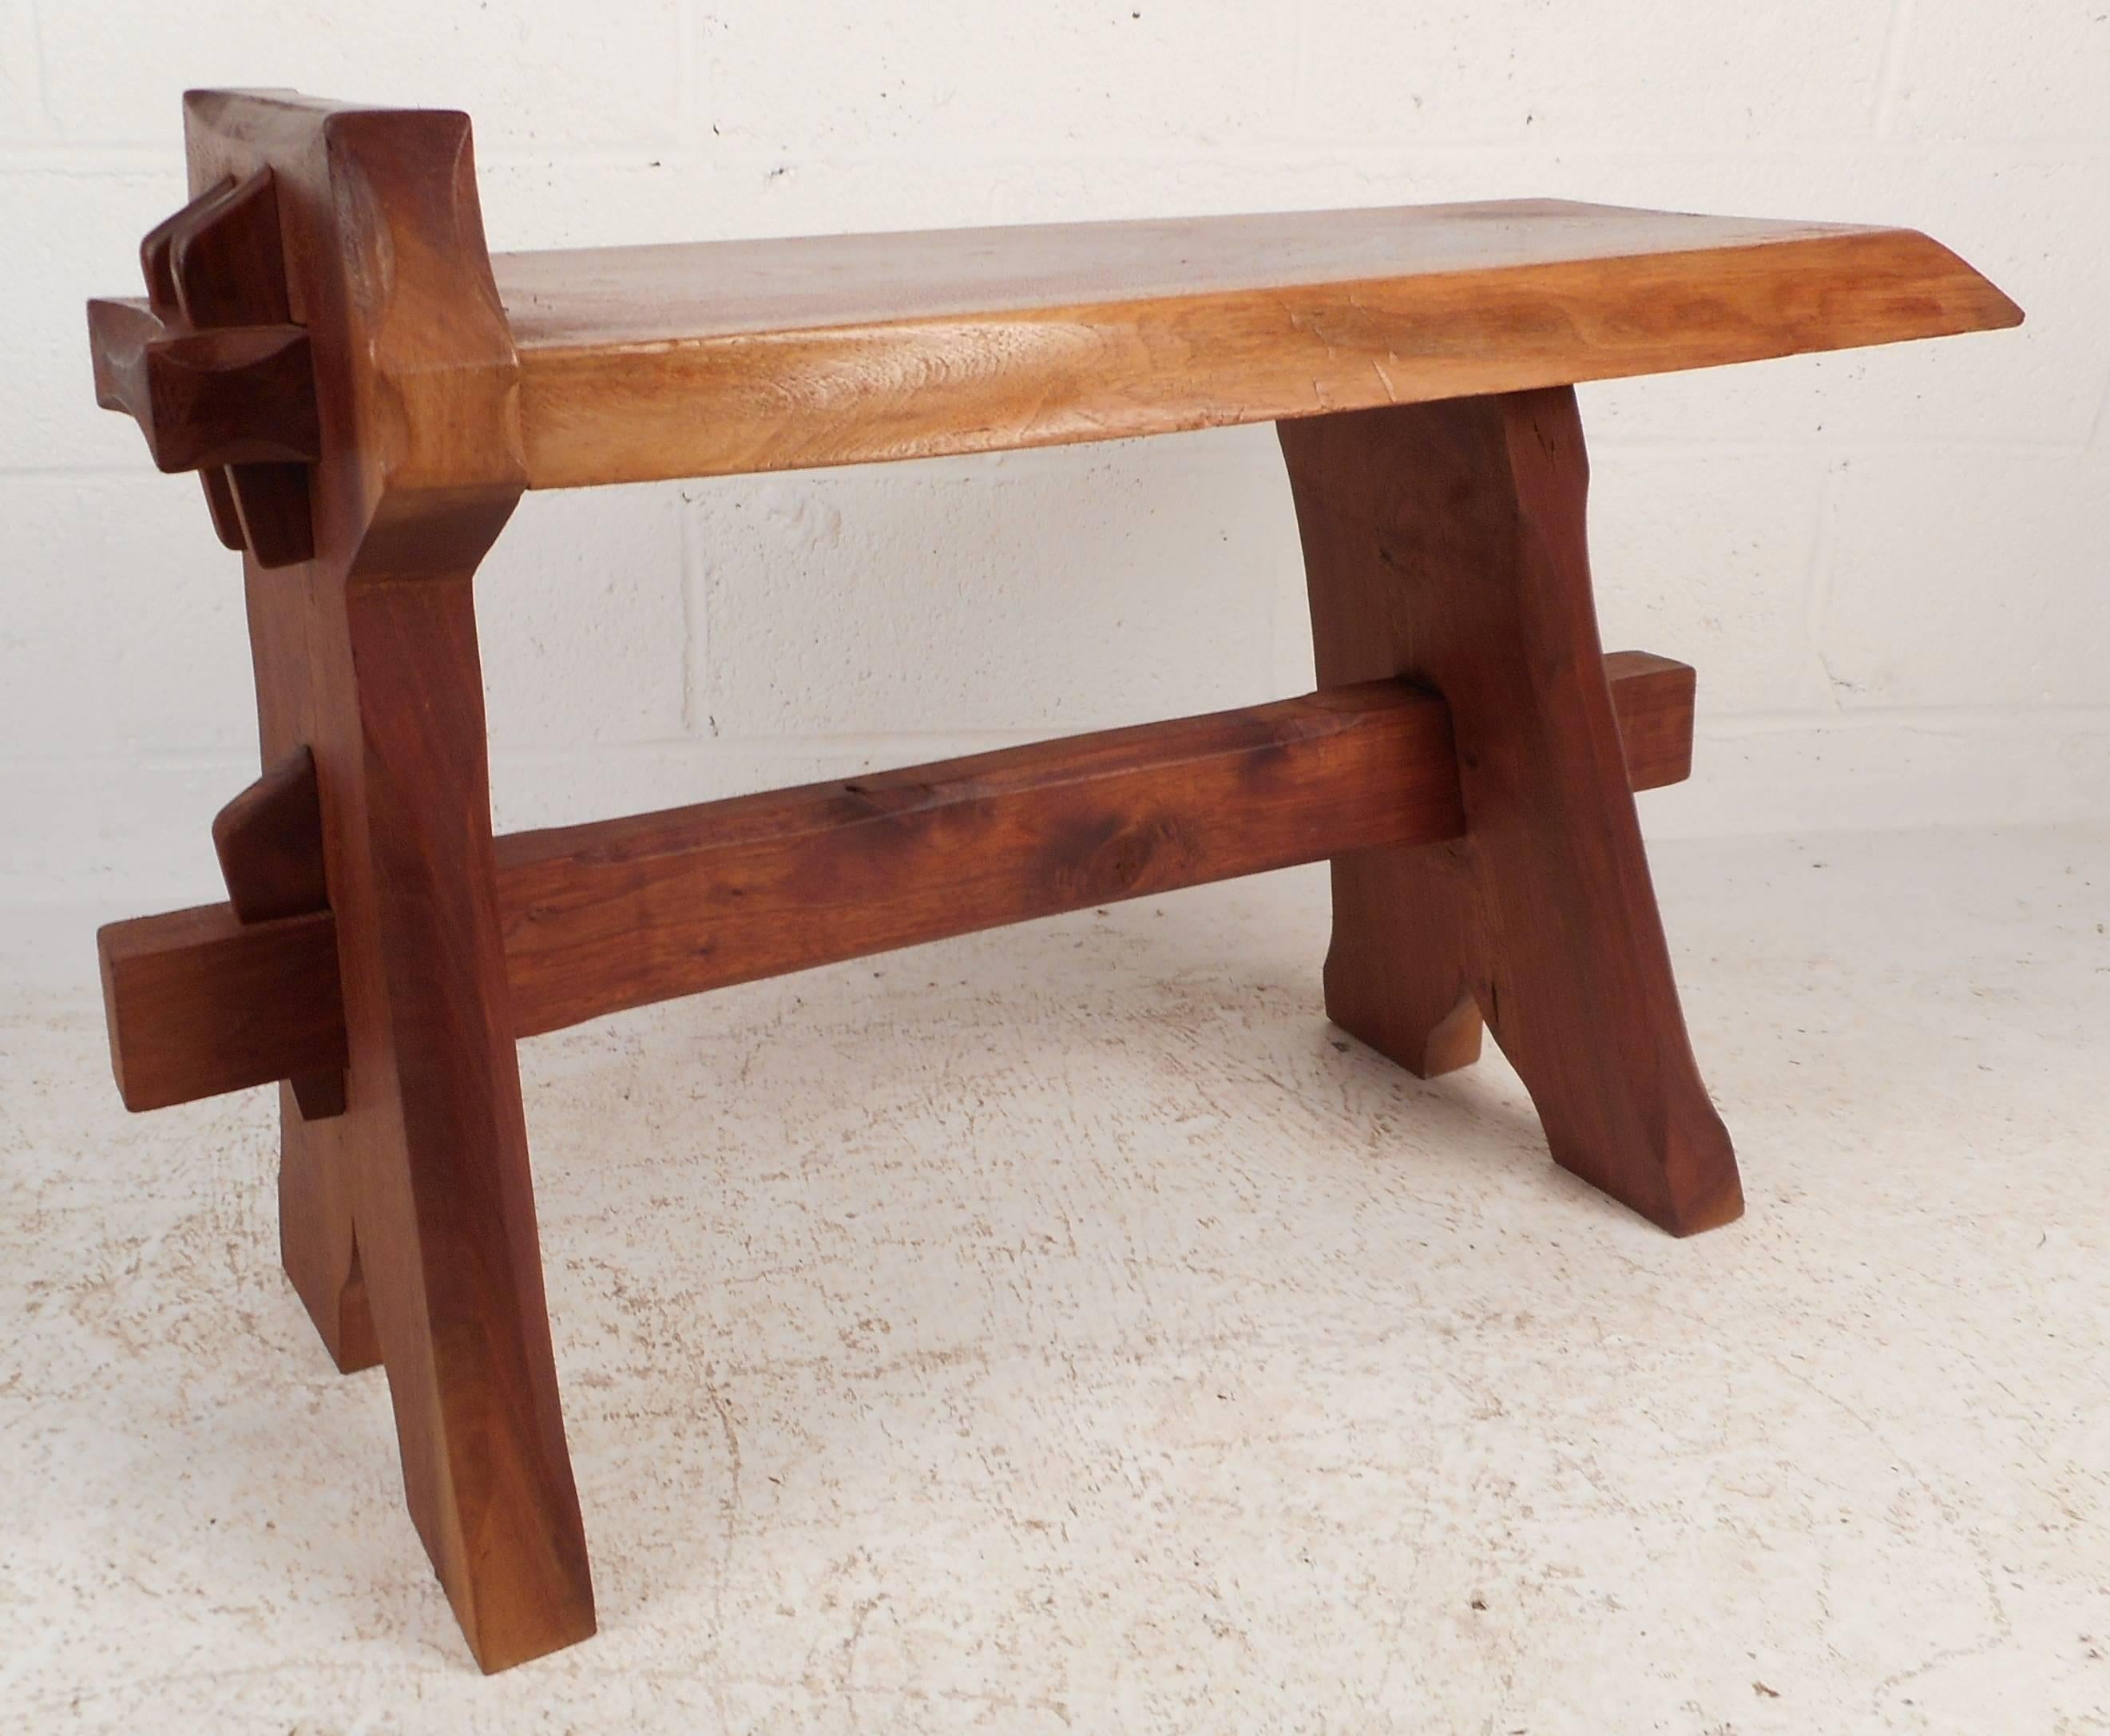 This wonderful vintage modern cobblers bench features a thick tree slab top and sturdy free-form legs. The versatile design can be used as a bench or a table showing quality craftsmanship. Stylish design makes the perfect addition to any modern